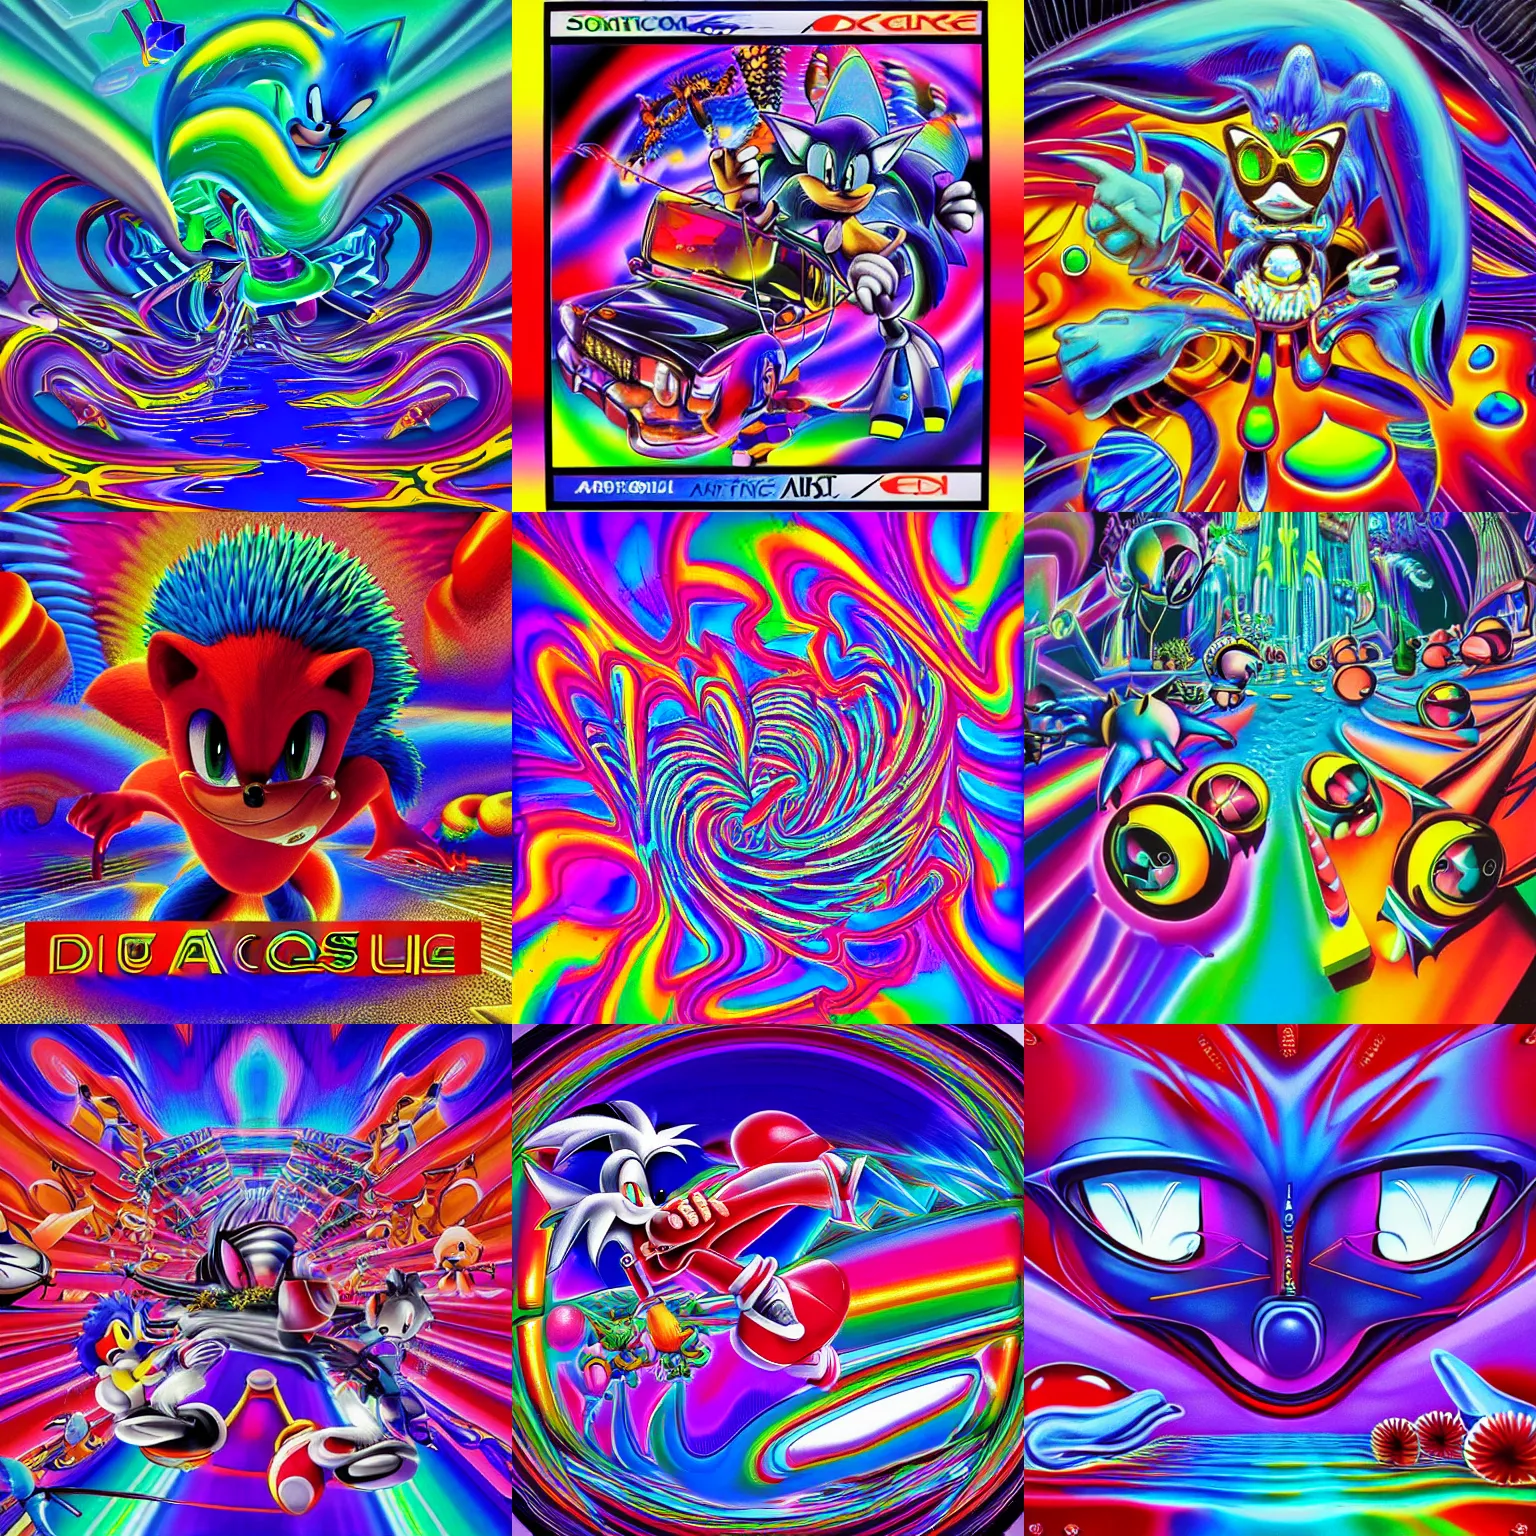 Prompt: surreal, sharp, detailed professional, high quality airbrush art mgmt album cover of a liquid dissolving airbrush art lsd dmt sonic the hedgehog channel surfing through cyberspace, iridescent checkerboard background, 1 9 9 0 s 1 9 9 2 sega genesis video game album cover